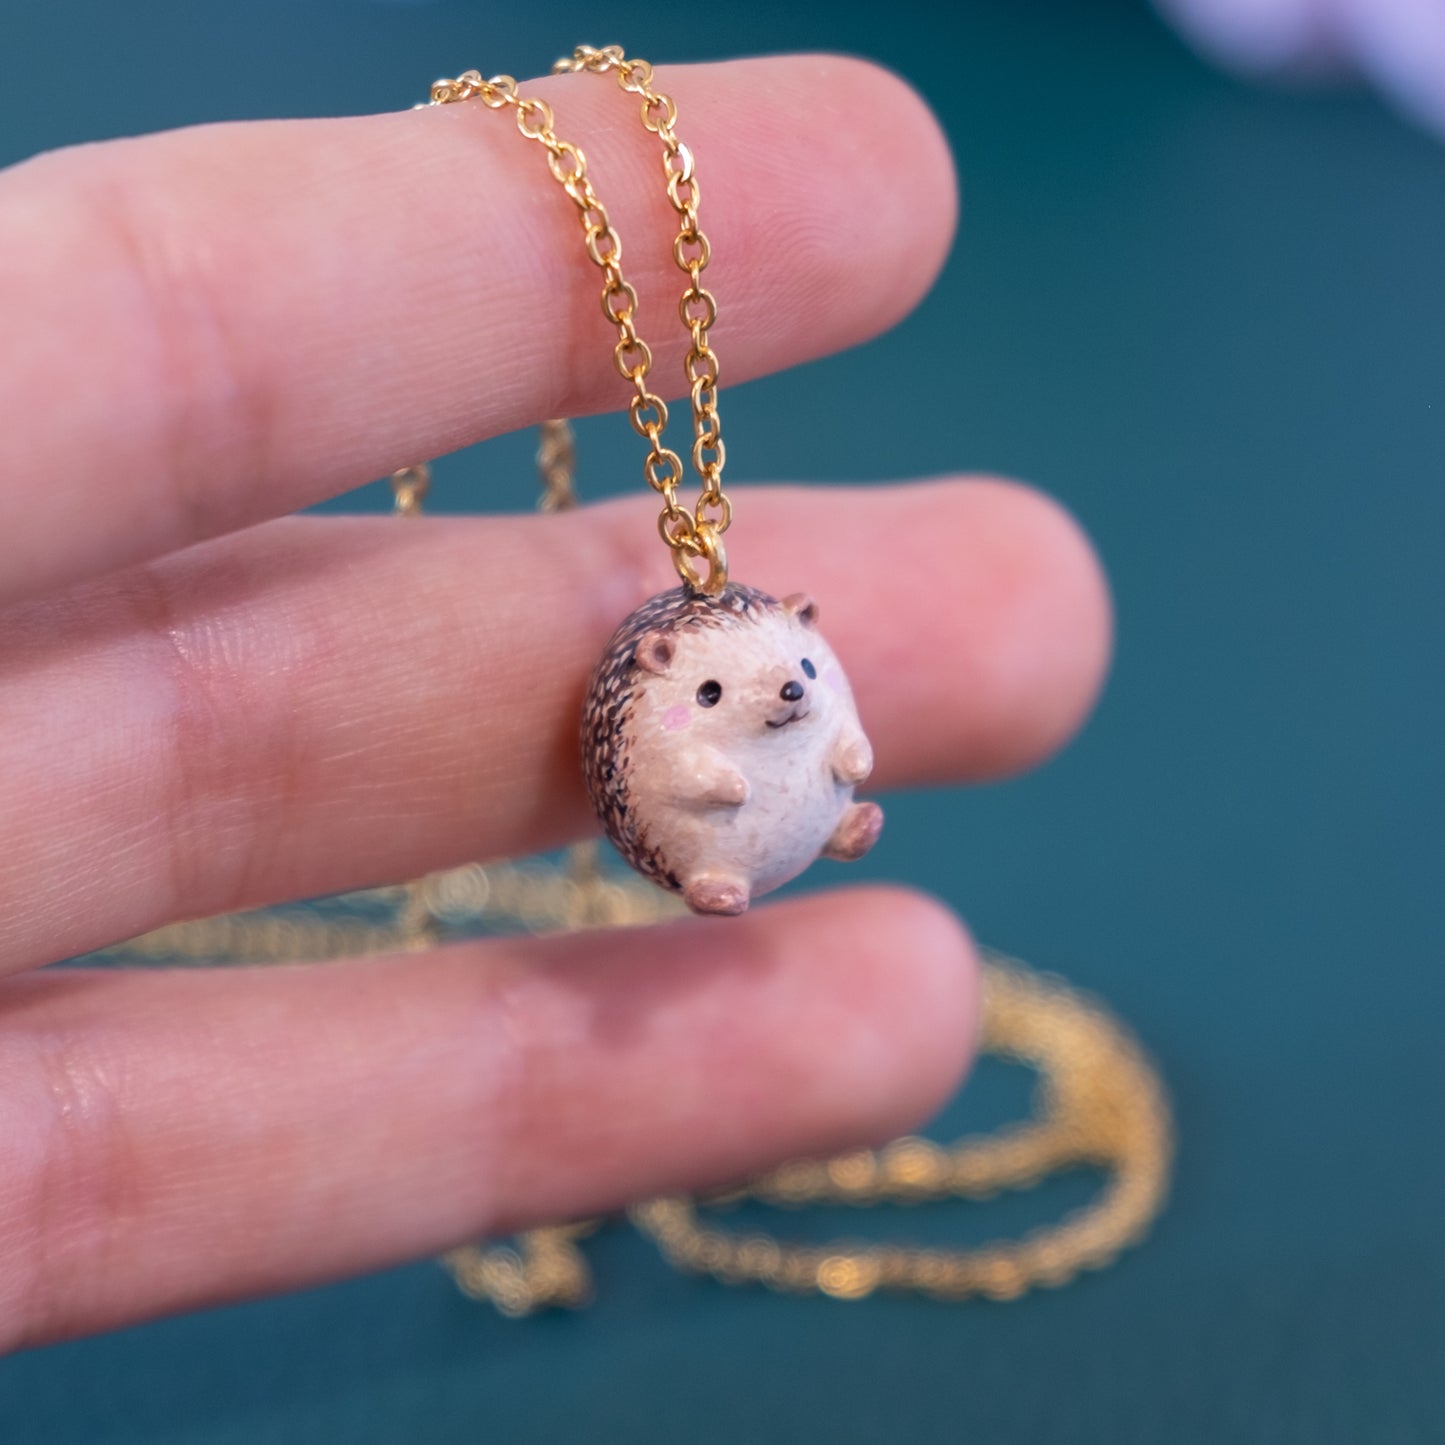 Tiny Hedgehog Necklace in Polymer Clay